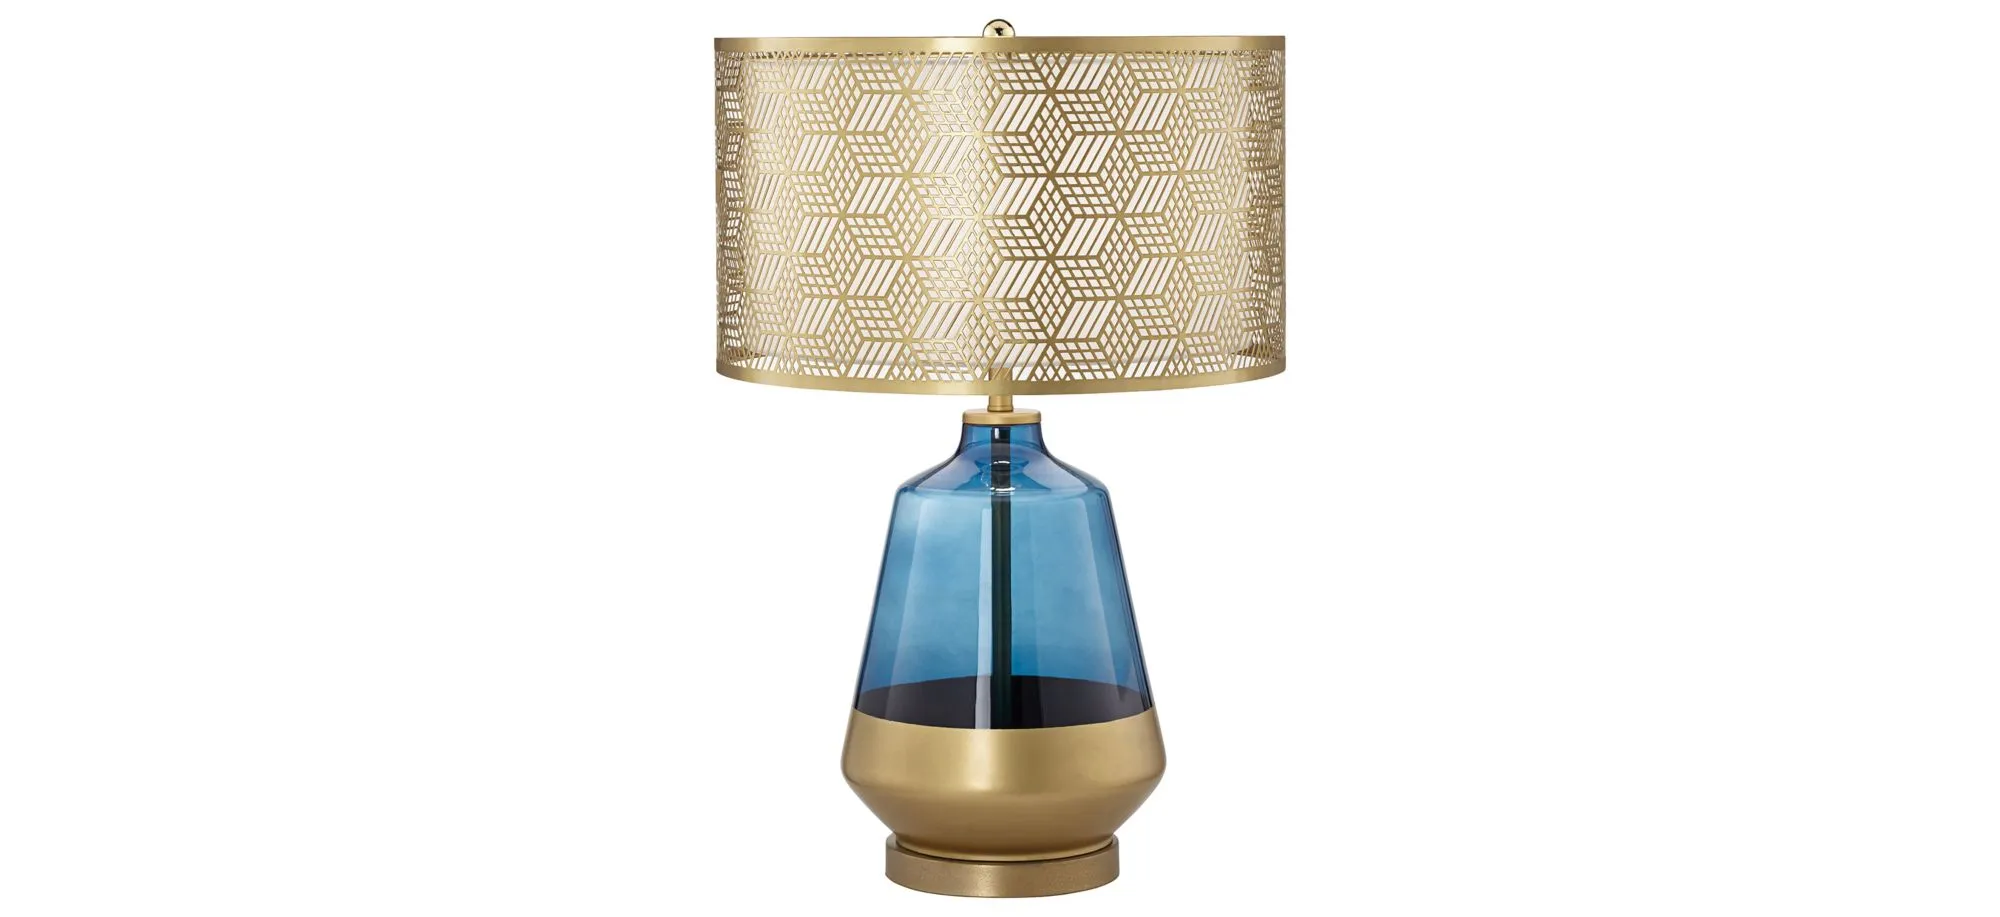 Taurus Table Lamp in Cobalt Blue by Pacific Coast